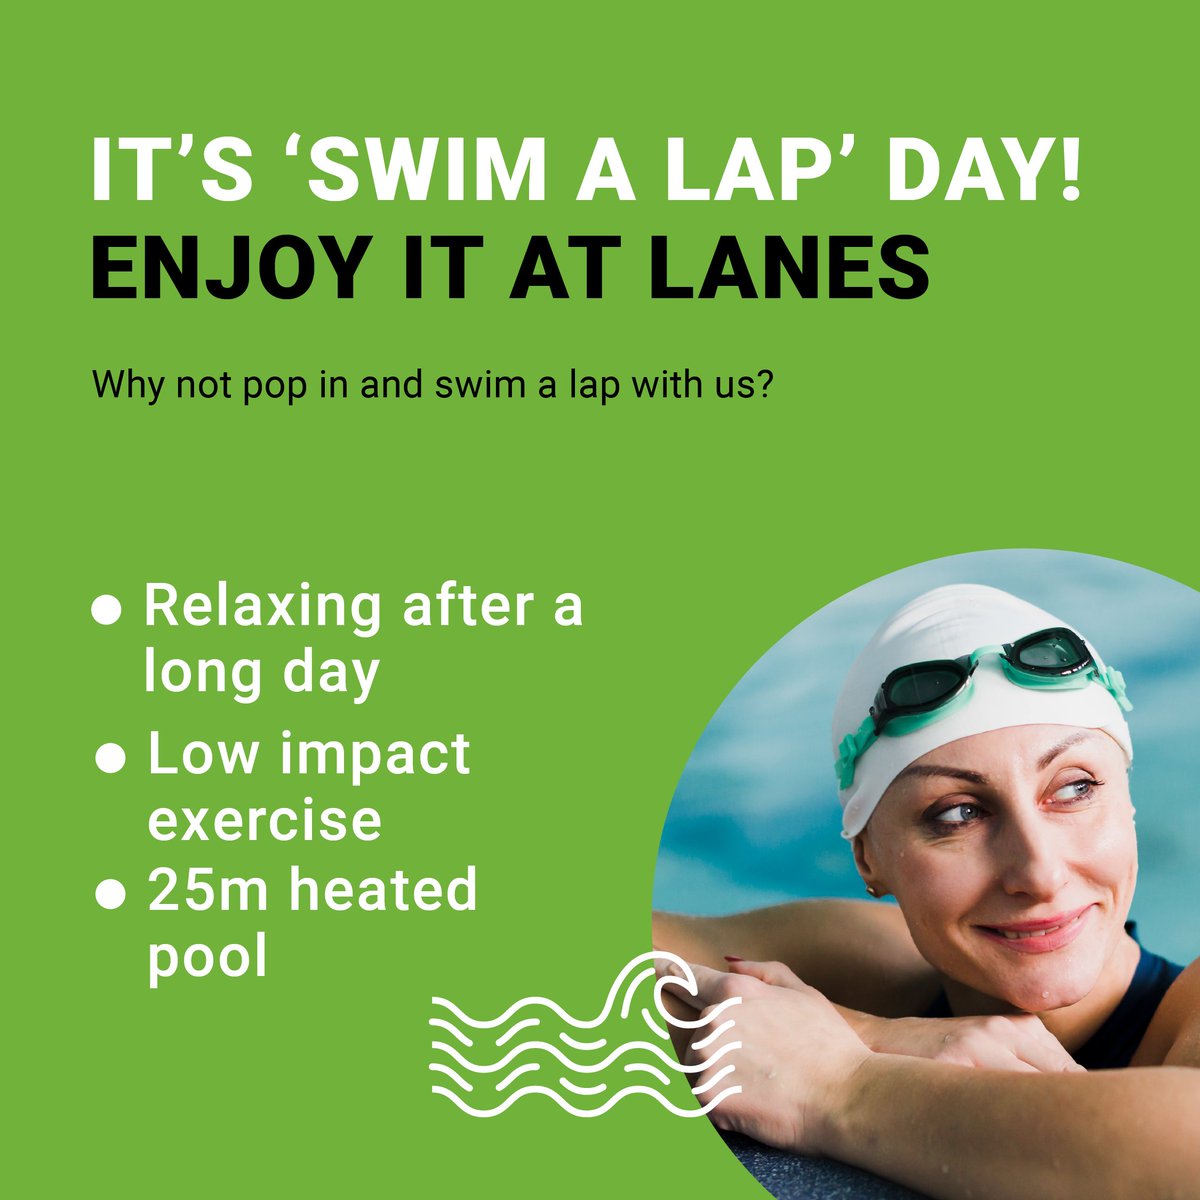 🏊🏊‍♂️🏊‍♀️Today is Swim a Lap Day!🏊‍♀️🏊‍♂️🏊

🥽 It's time to get your goggles out and swim a lap in our cooling 25m pool! Swimming is a great low impact sport. 🥽 💪
 
#swimalap #swimming #keepingmoving #lowerimpact #musclestrength #goodforarthritis #goodmobility loom.ly/A-5LV1k